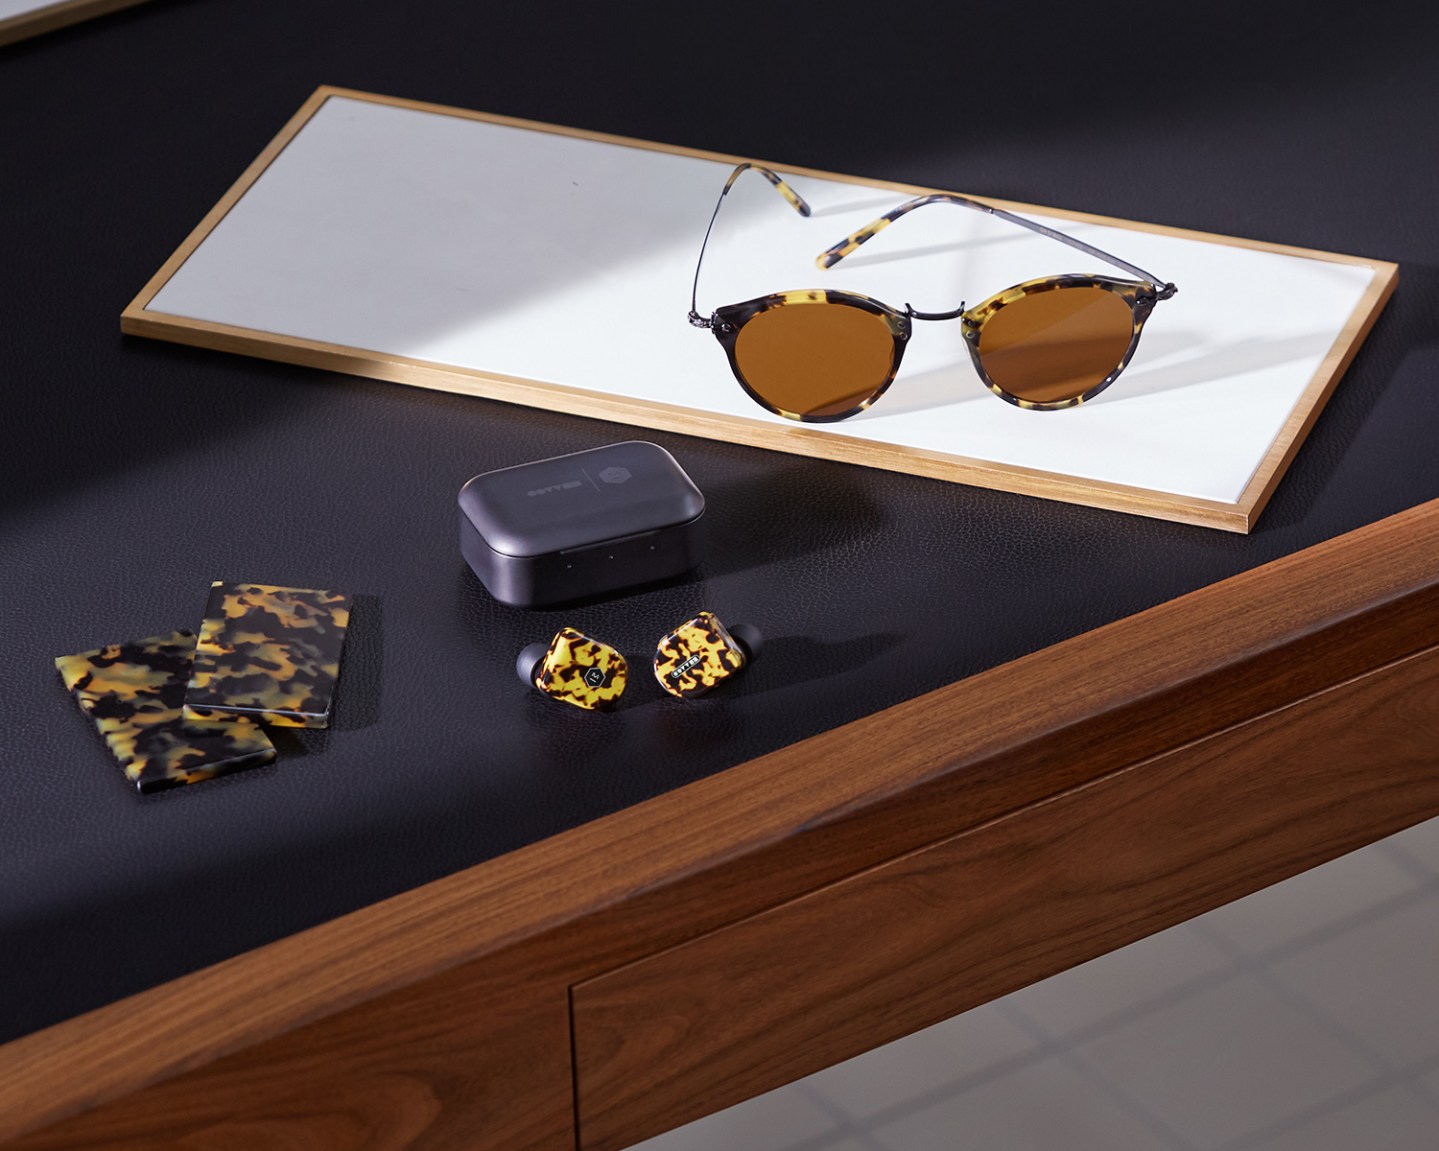 Master & Dynamic for Oliver Peoples features Mazzucchelli 1849 acetate